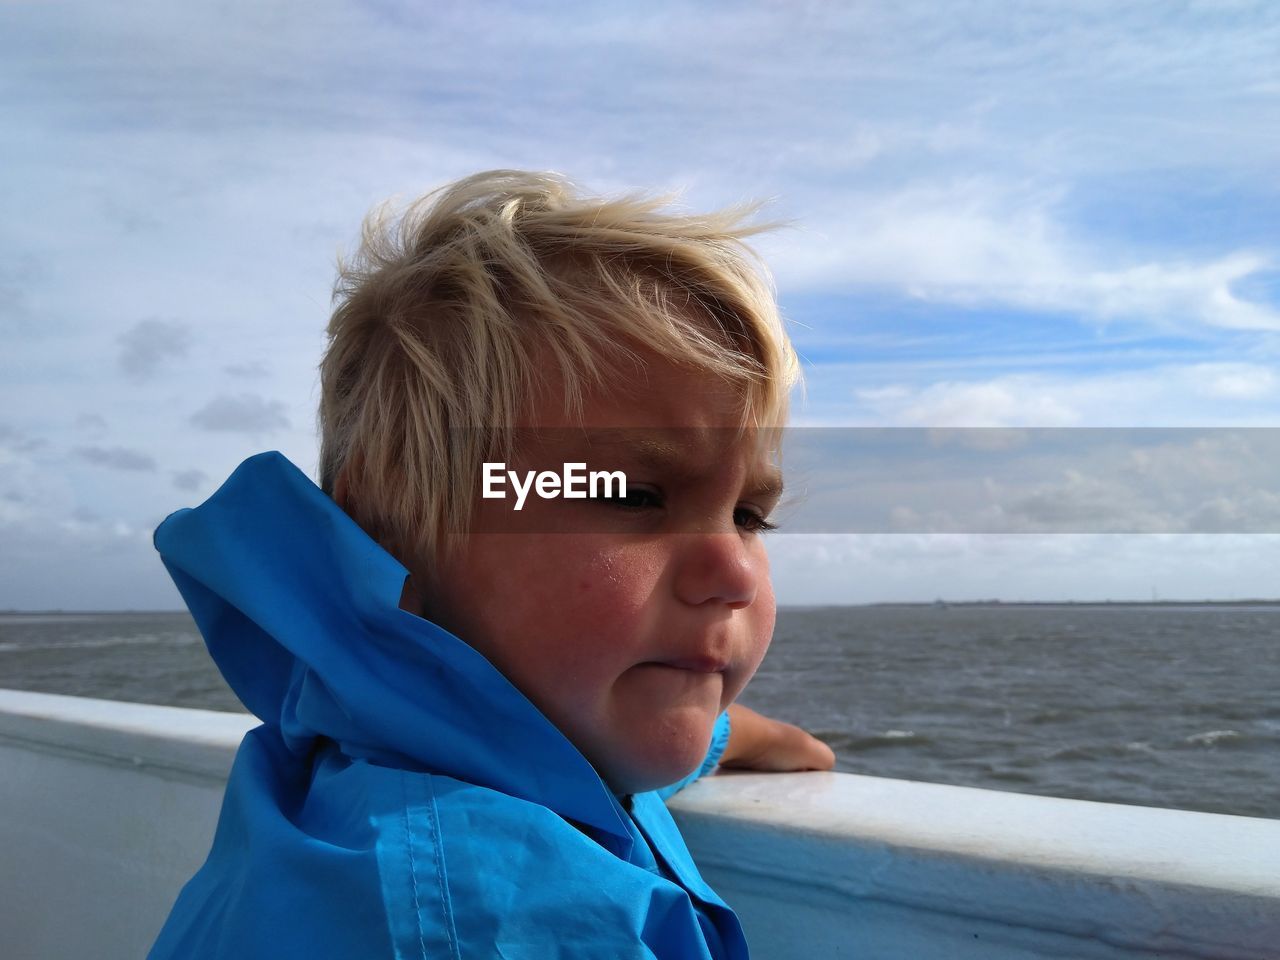 blue, childhood, child, water, sea, blond hair, men, one person, vacation, sky, portrait, headshot, cloud, nature, toddler, day, person, leisure activity, trip, looking, emotion, holiday, horizon, beach, horizon over water, nautical vessel, outdoors, travel, transportation, land, smiling, clothing, human face, looking away, side view, lifestyles